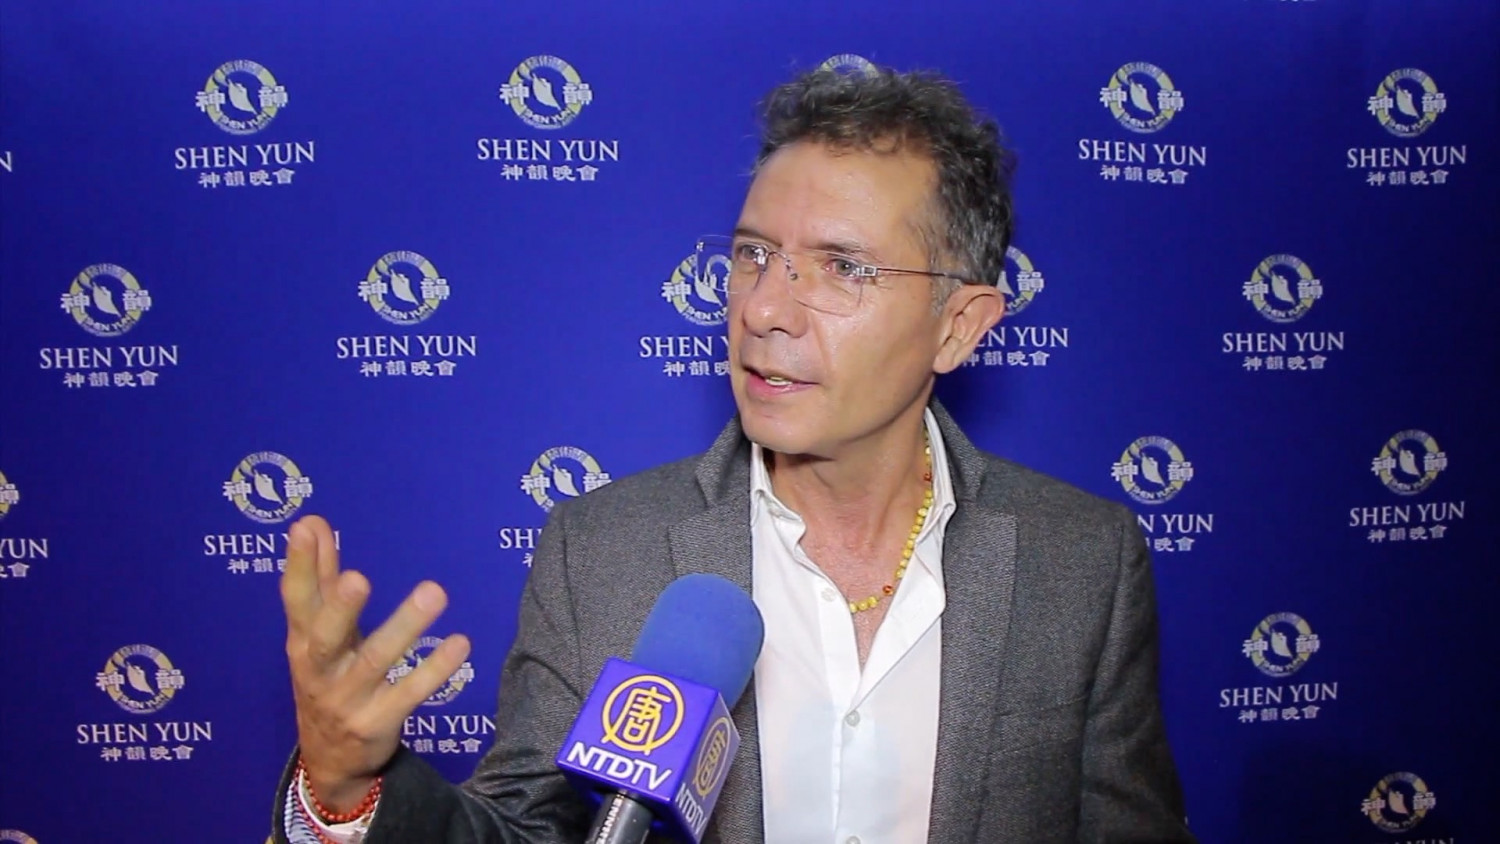 Shen Yun Artists ‘Touched My Soul’ Says Professor of Music